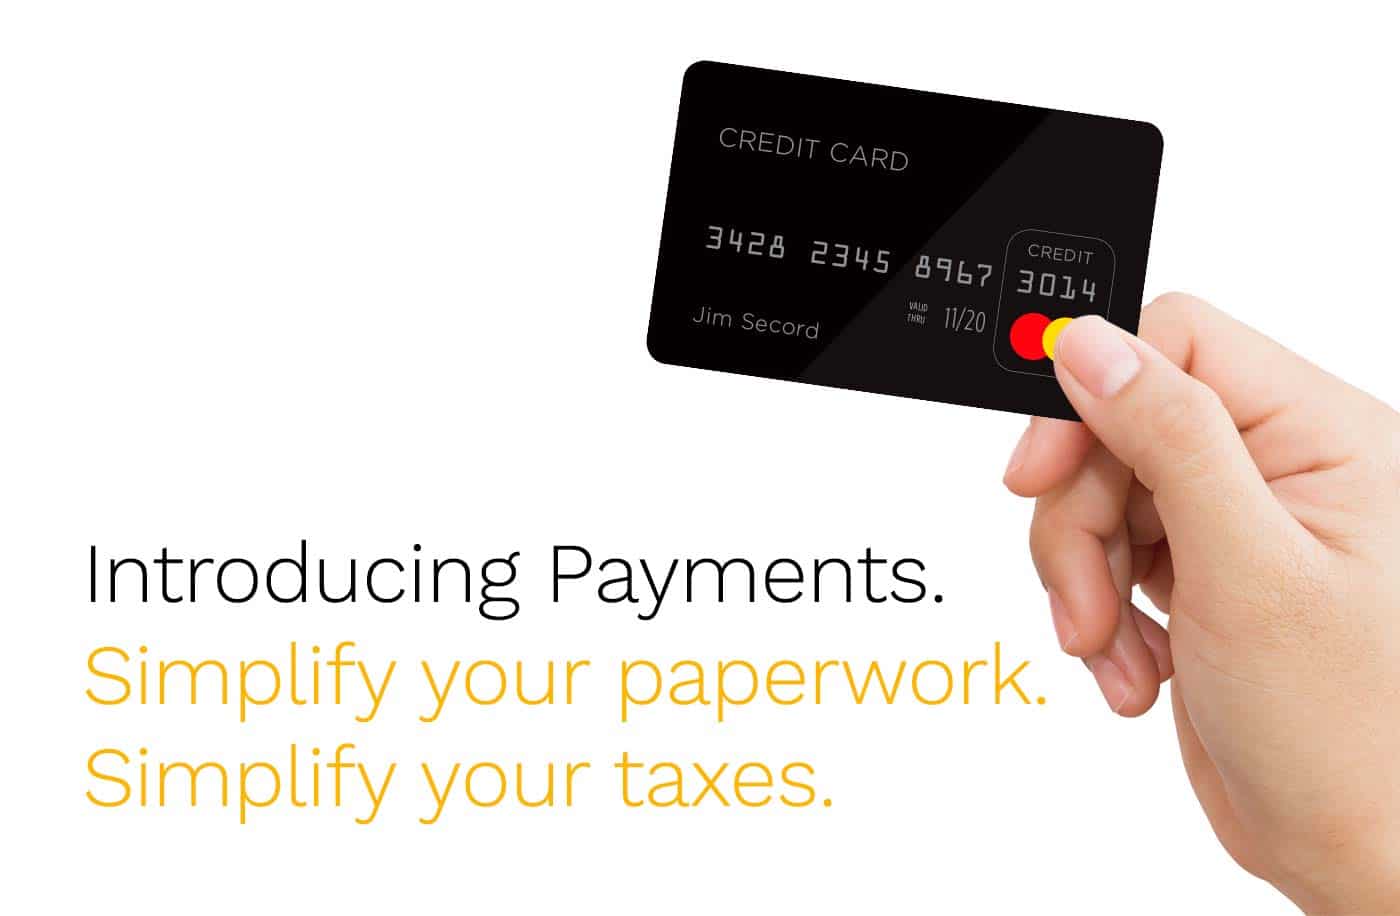 Introducing payments. Simplify your paperwork. Simplify your taxes.